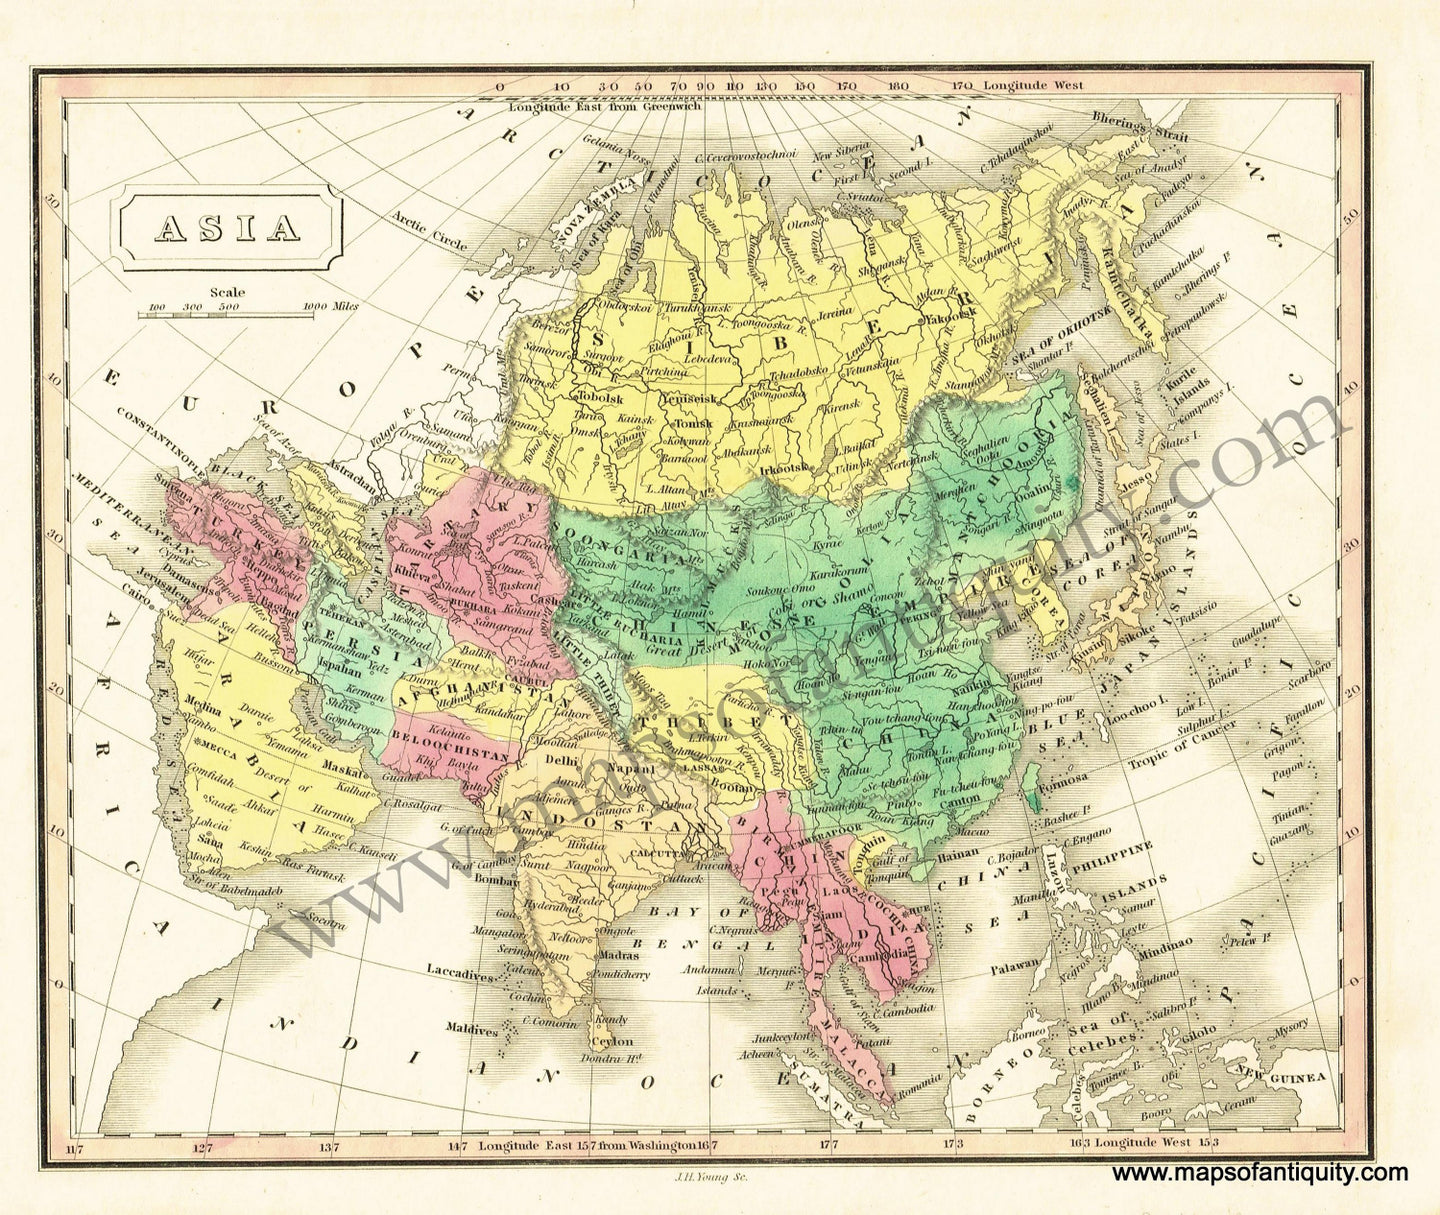 Antique-Hand-Colored-Map-Asia.-Asia-Asia-General-1828-Malte-Brun-Maps-Of-Antiquity